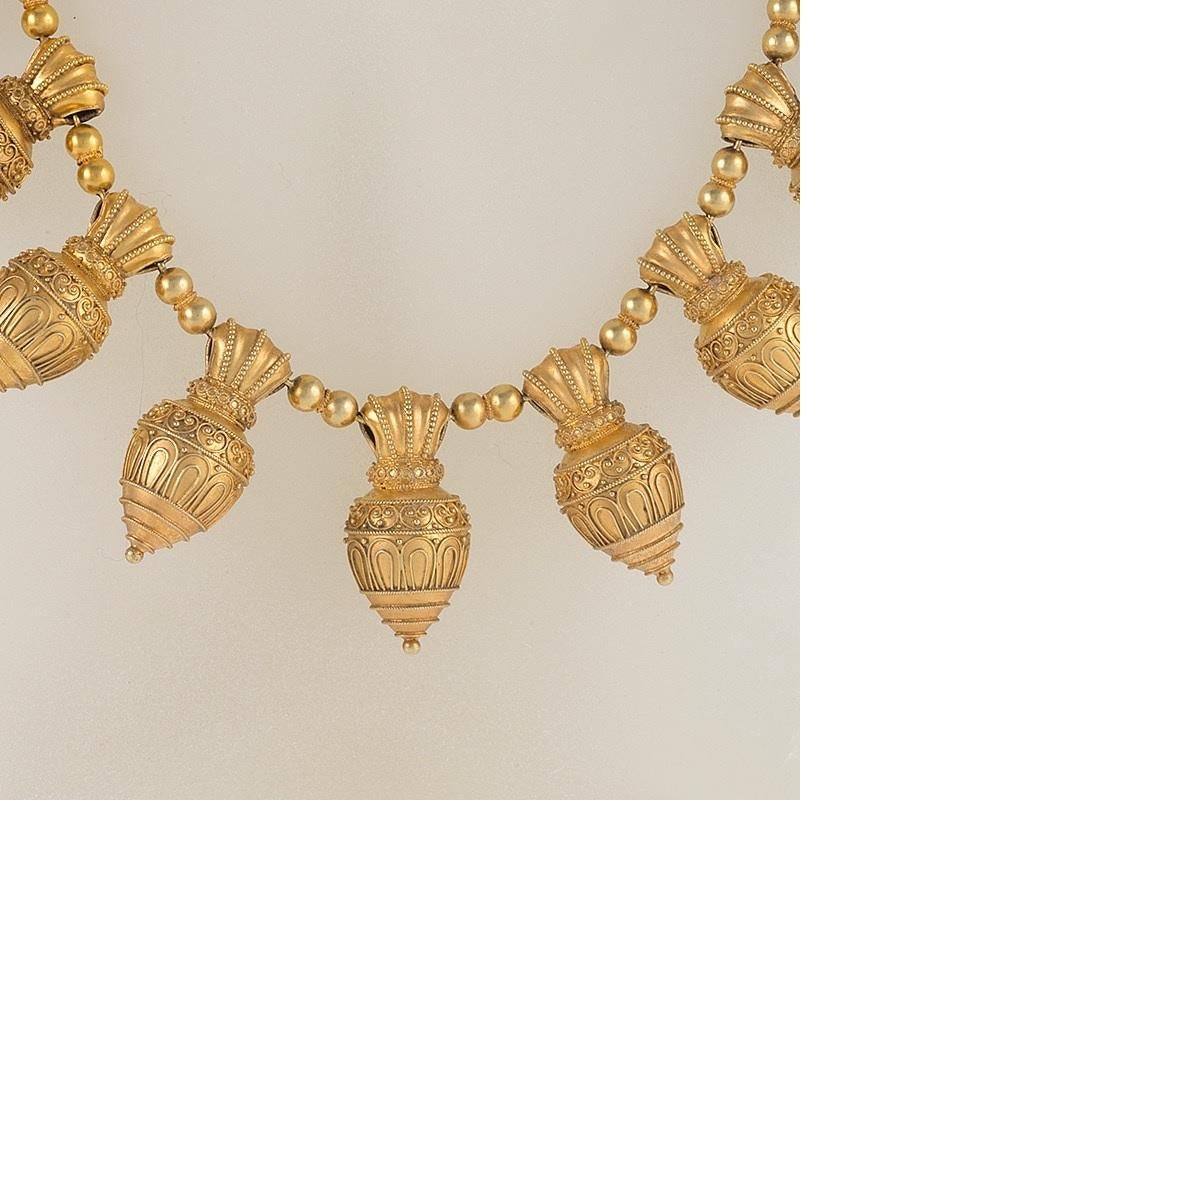 etruscan revival jewelry